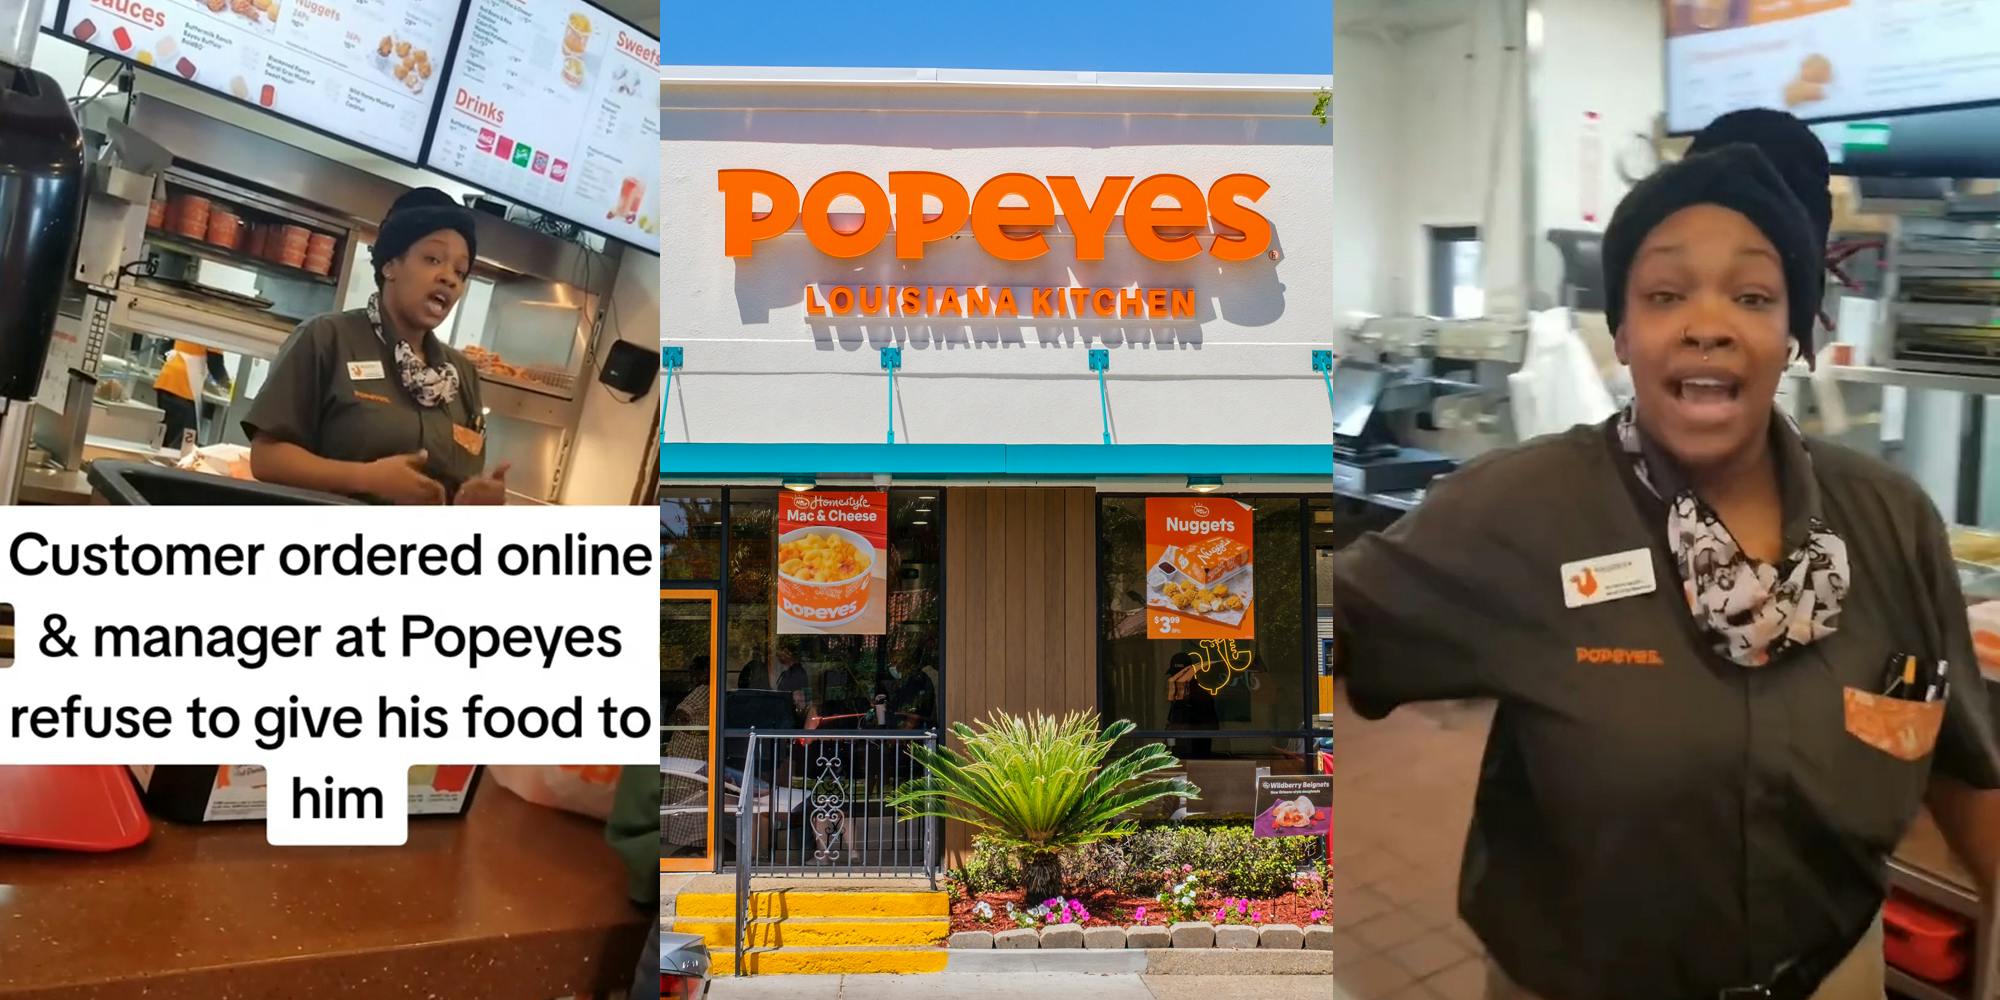 Popeyes interior with manager speaking with caption "Customer ordered online & manager at Popeyes refuse to give his food to him" (l) Popeyes building with sign (c) Popeyes interior with manager speaking (r)